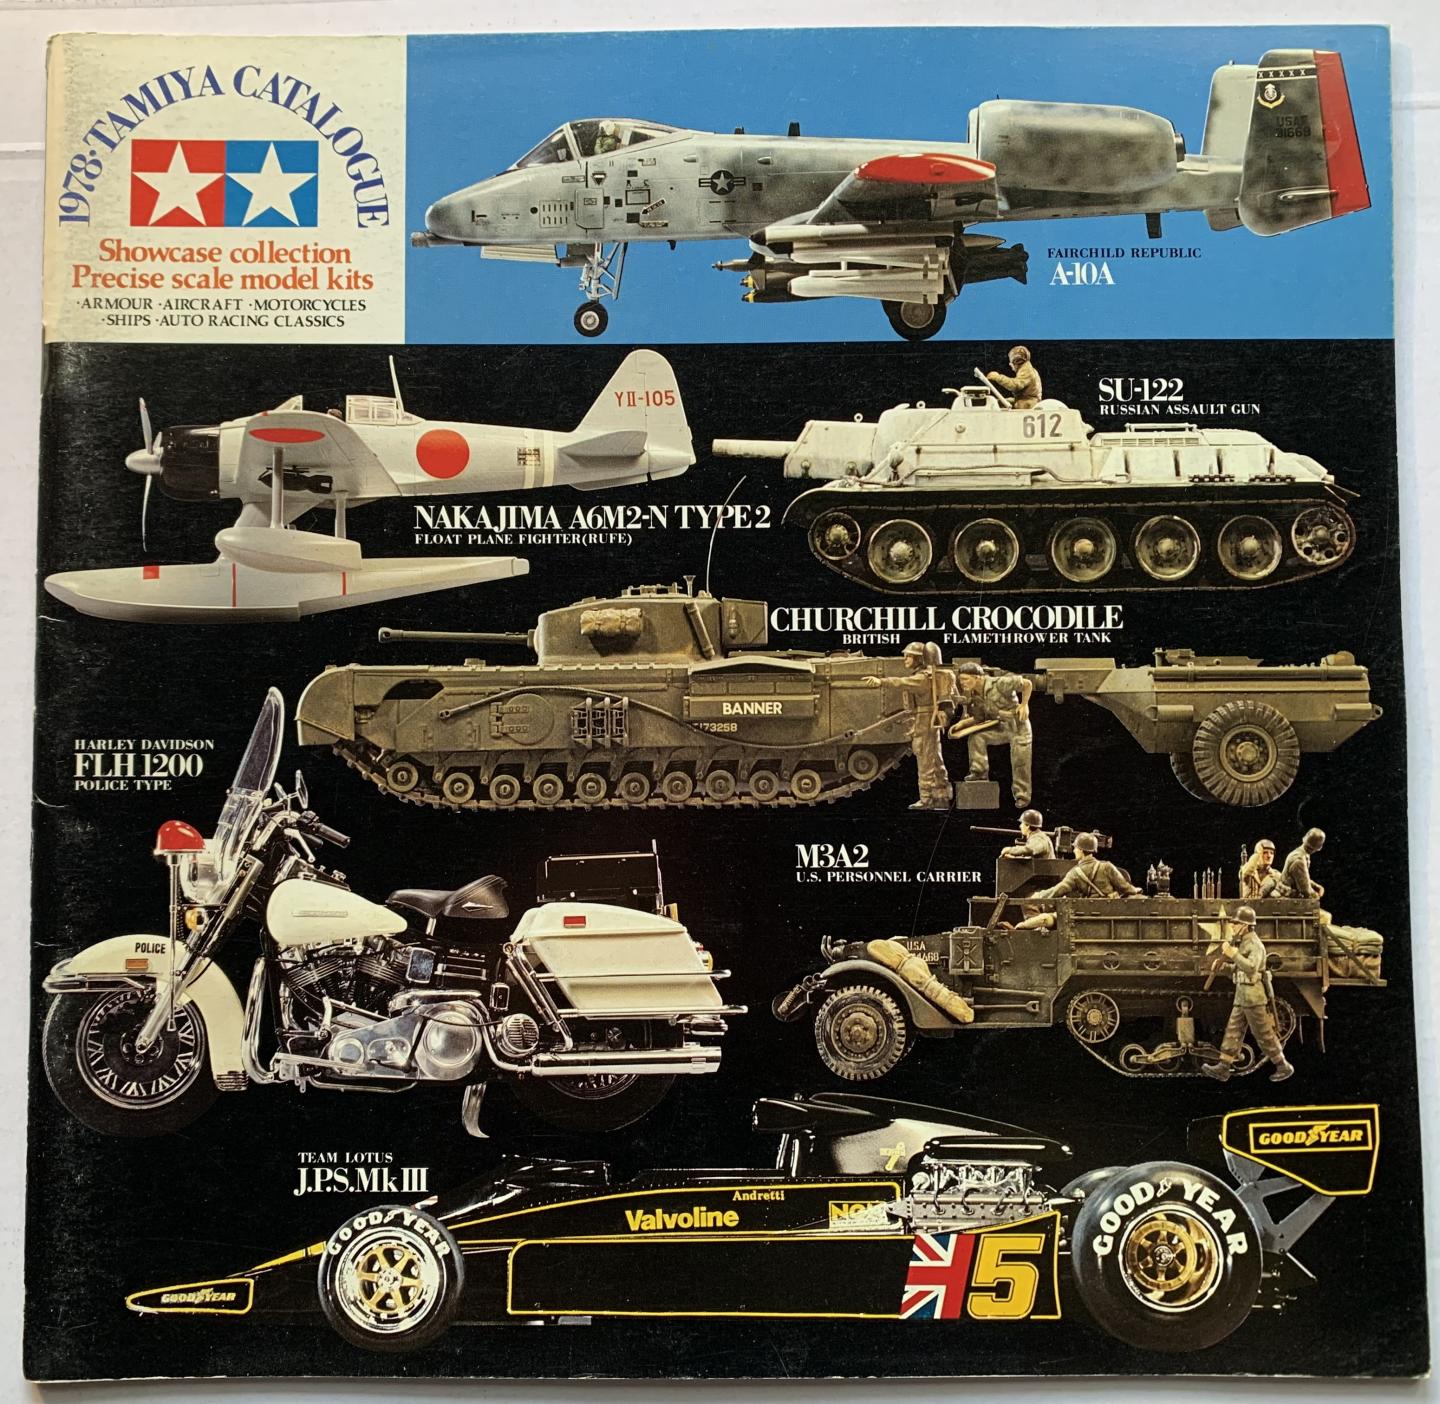 N.N. - 1978. Tamiya Catalogue. Showcase Collection precise scale model kits; armour, aircraft, motorcycles, ships, auto racing classics.